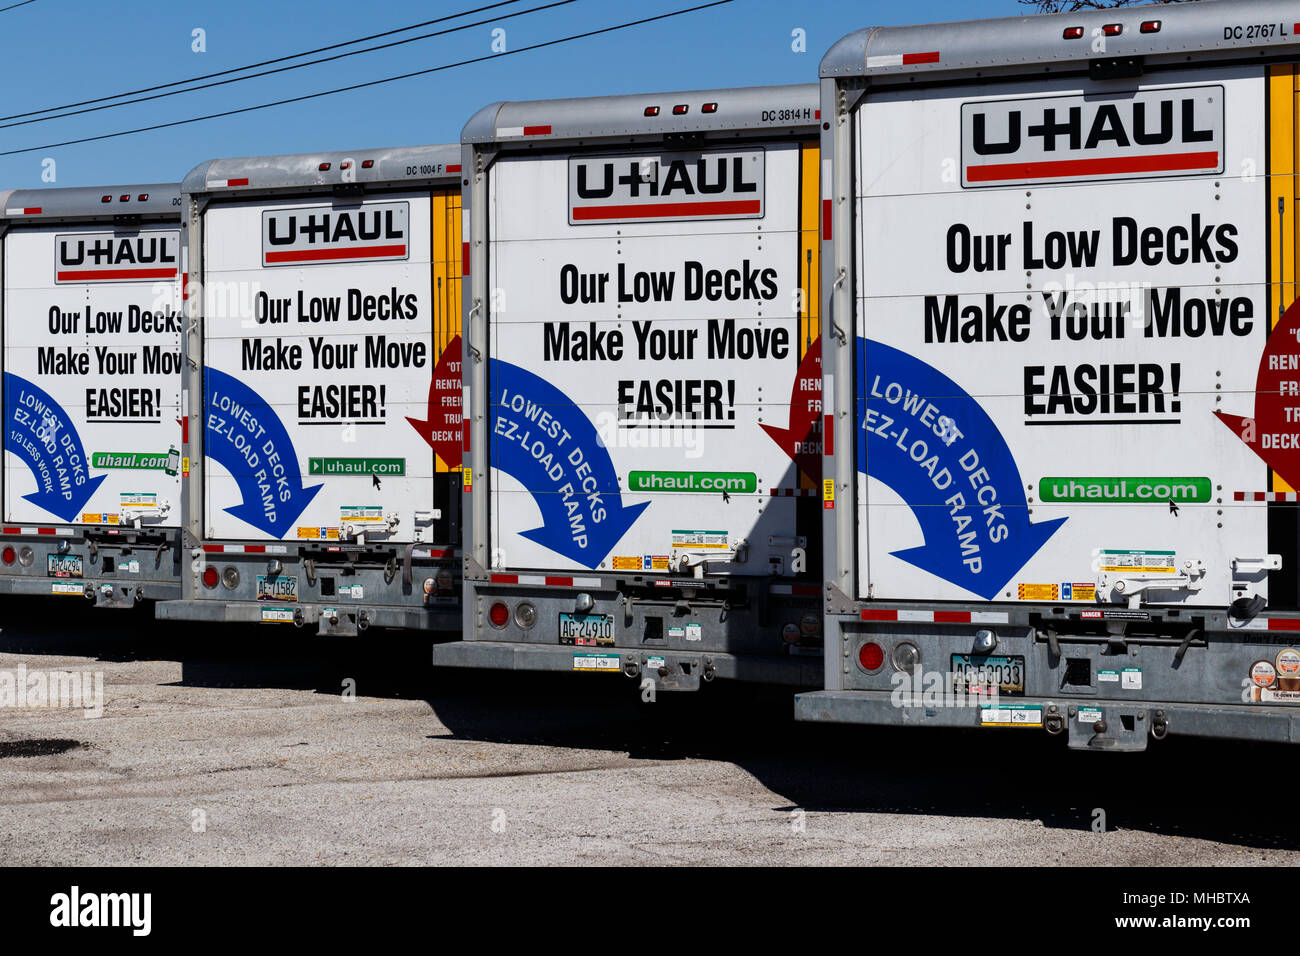 Lafayette - Circa April 2018: U-Haul Moving Truck Rental Location. U-Haul offers moving and storage solutions I Stock Photo